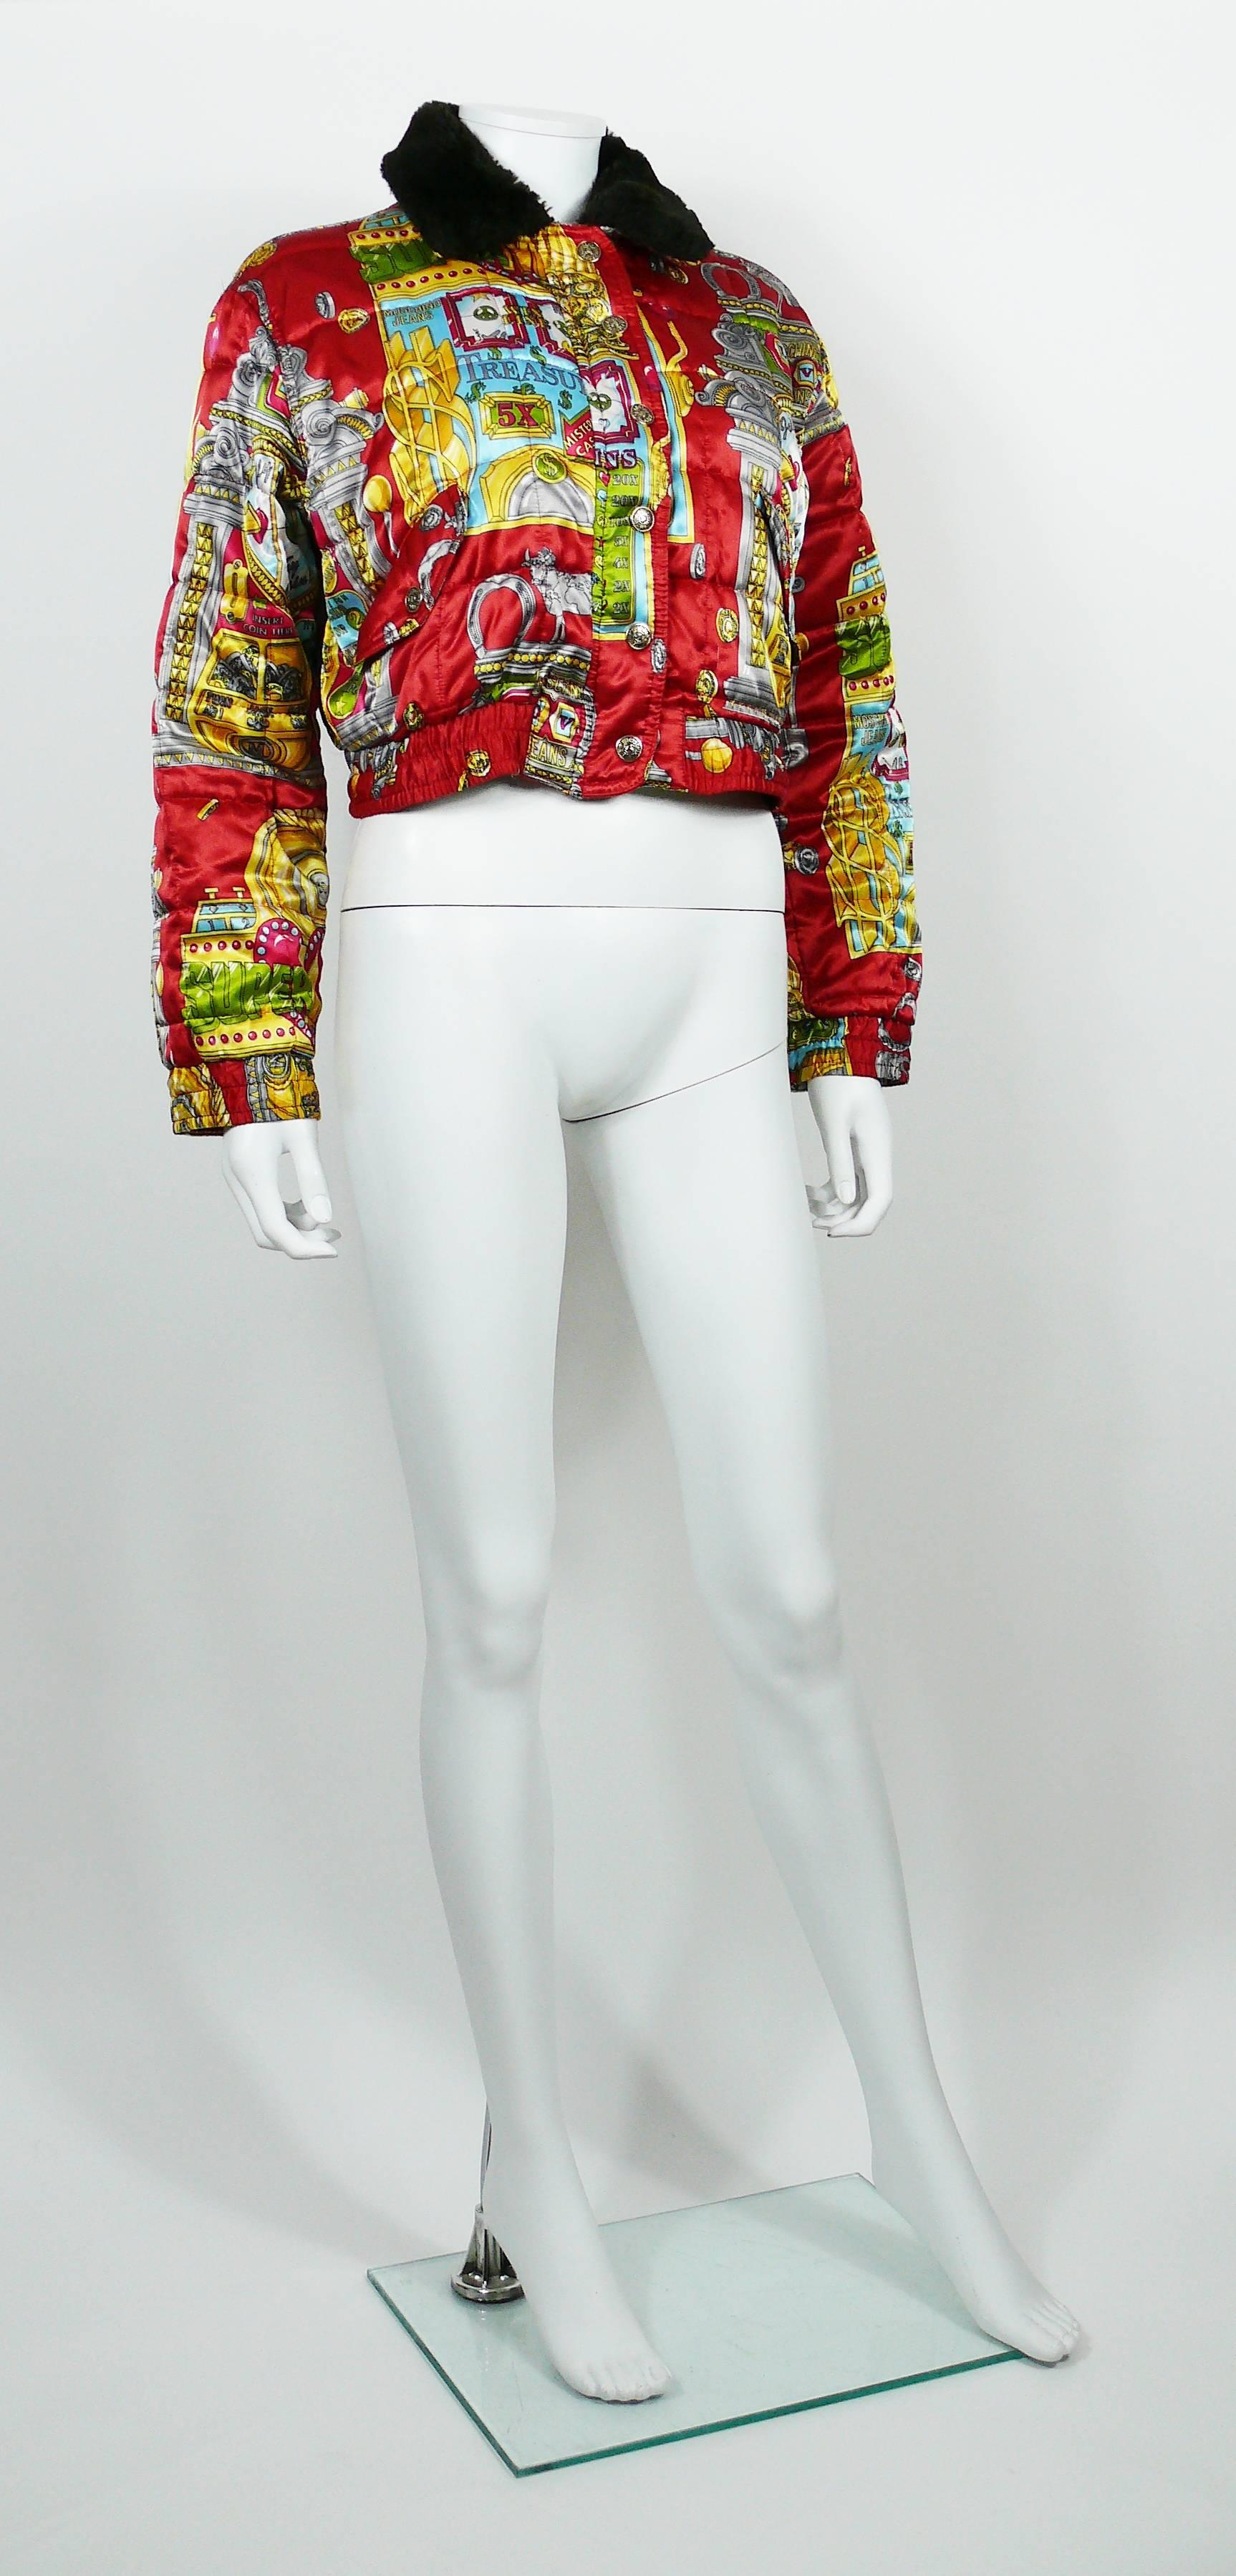 MOSCHINO JEANS vintage iconic multi colored bomber jacket featuring a slotter casino game print all over.

This bomber jacket features :
- Faux fur collar.
- Long sleeves.
- Front zipper and snap buttons closure.
- Two pockets.
- Gold toned